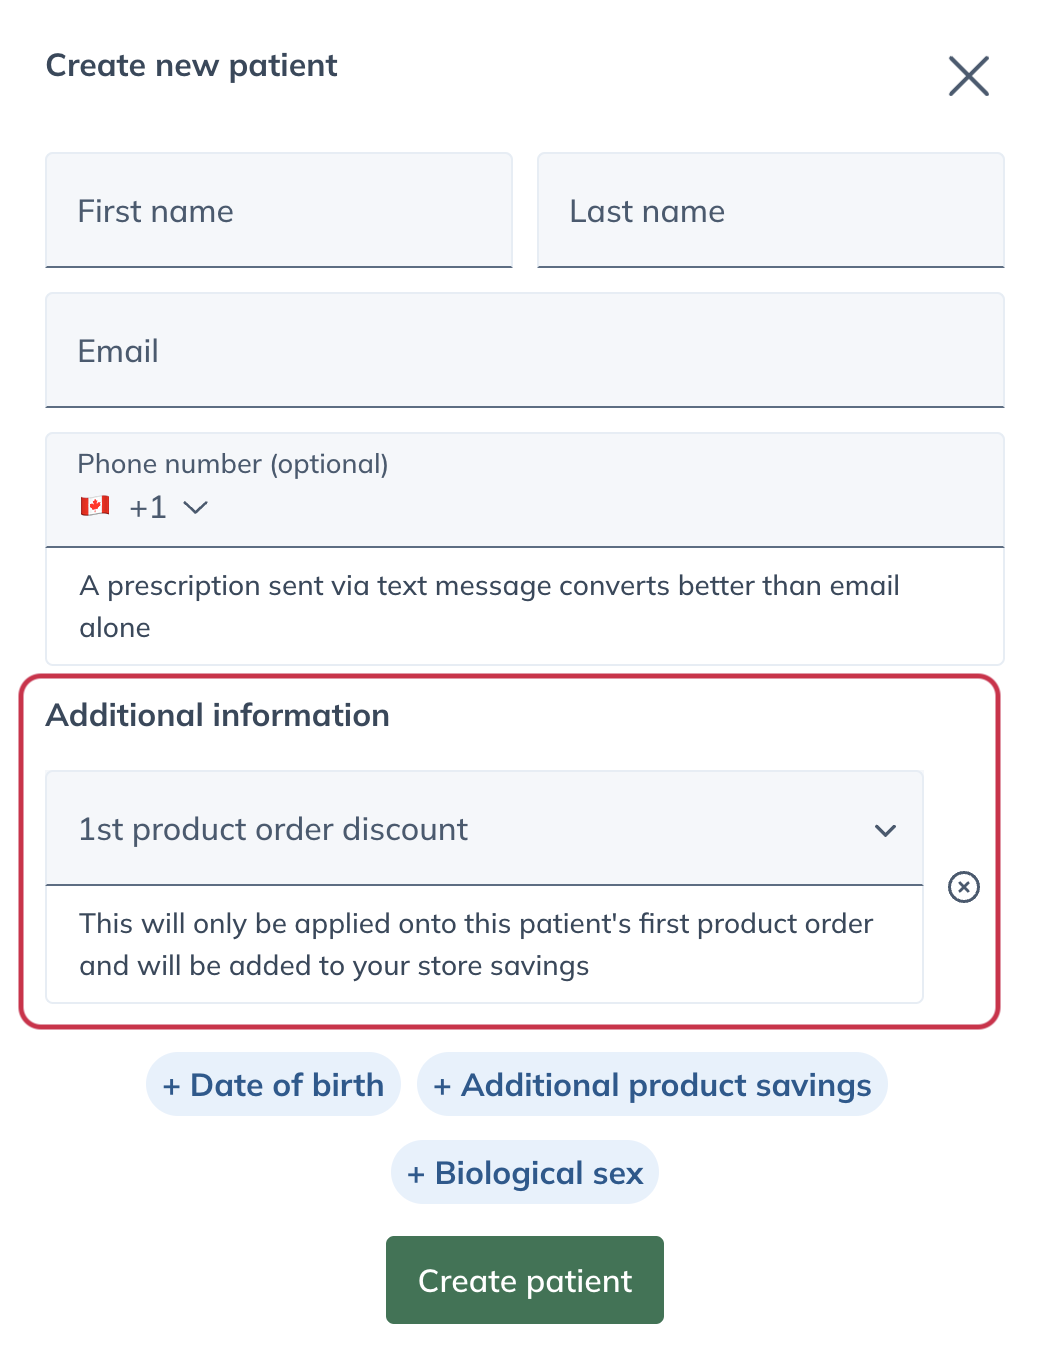 Applying a first order discount from a patient profile.